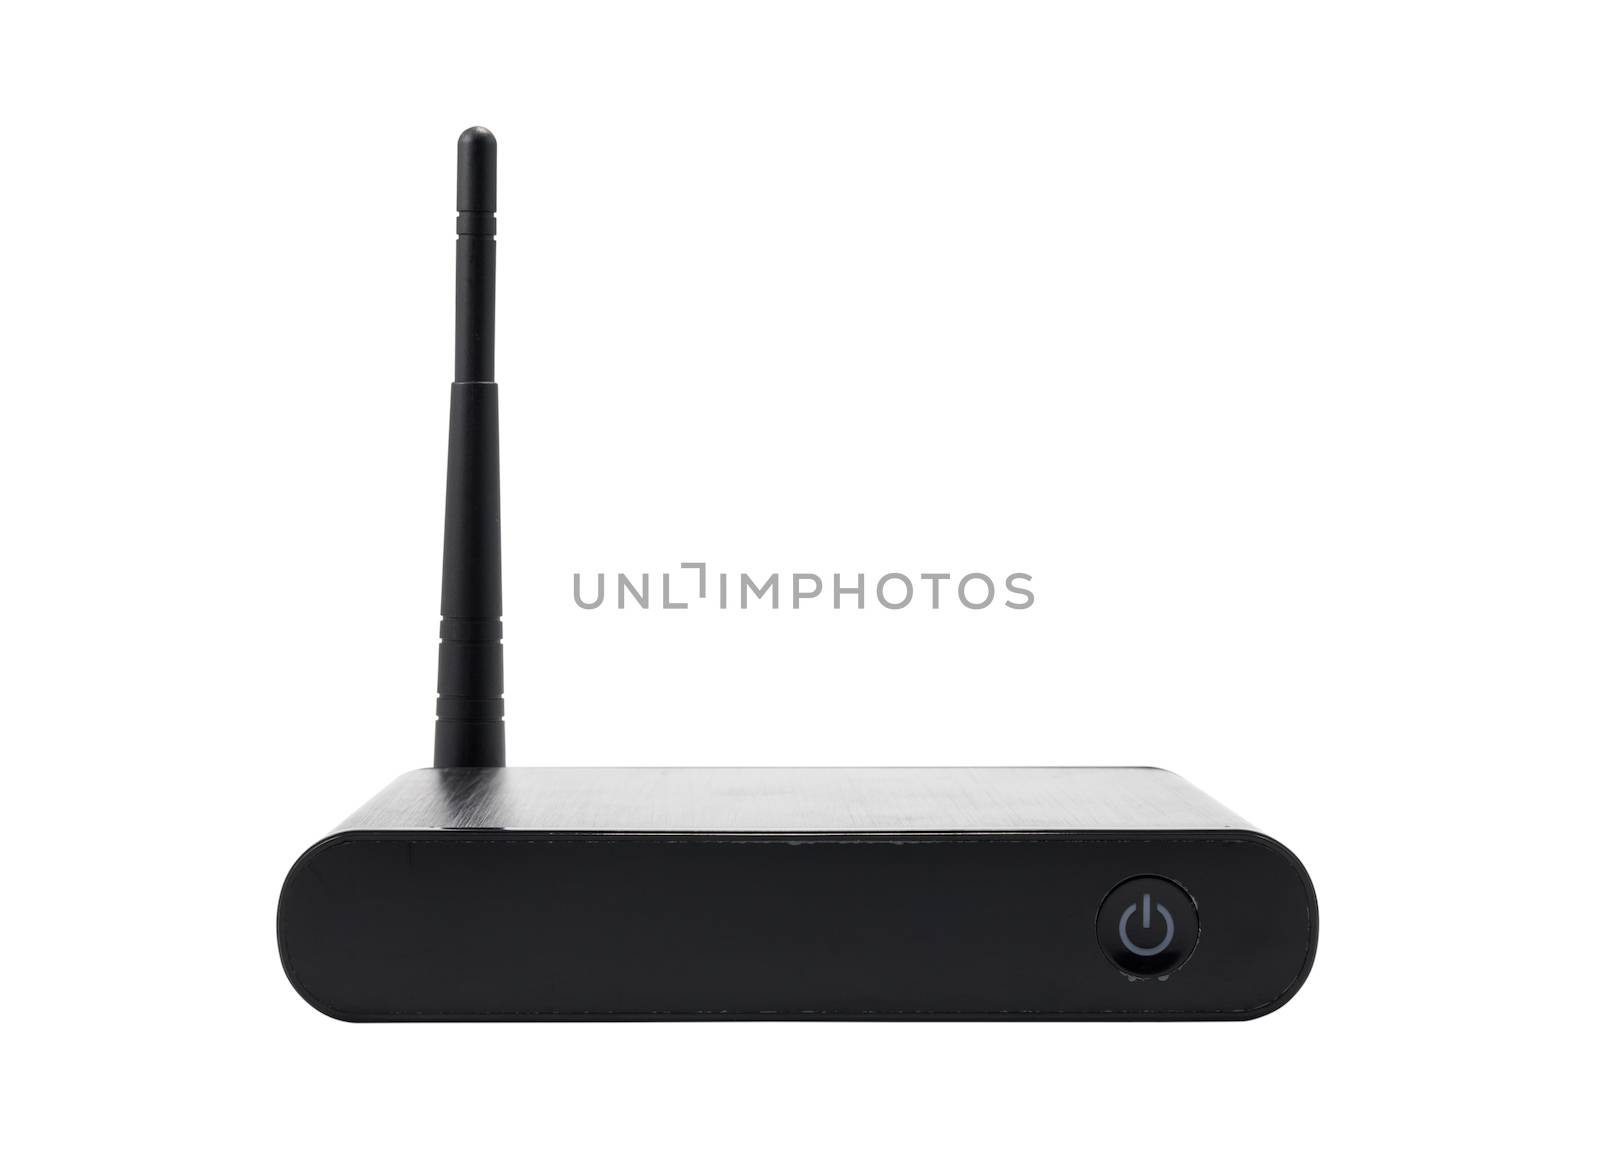 Wireless router isolated on white background